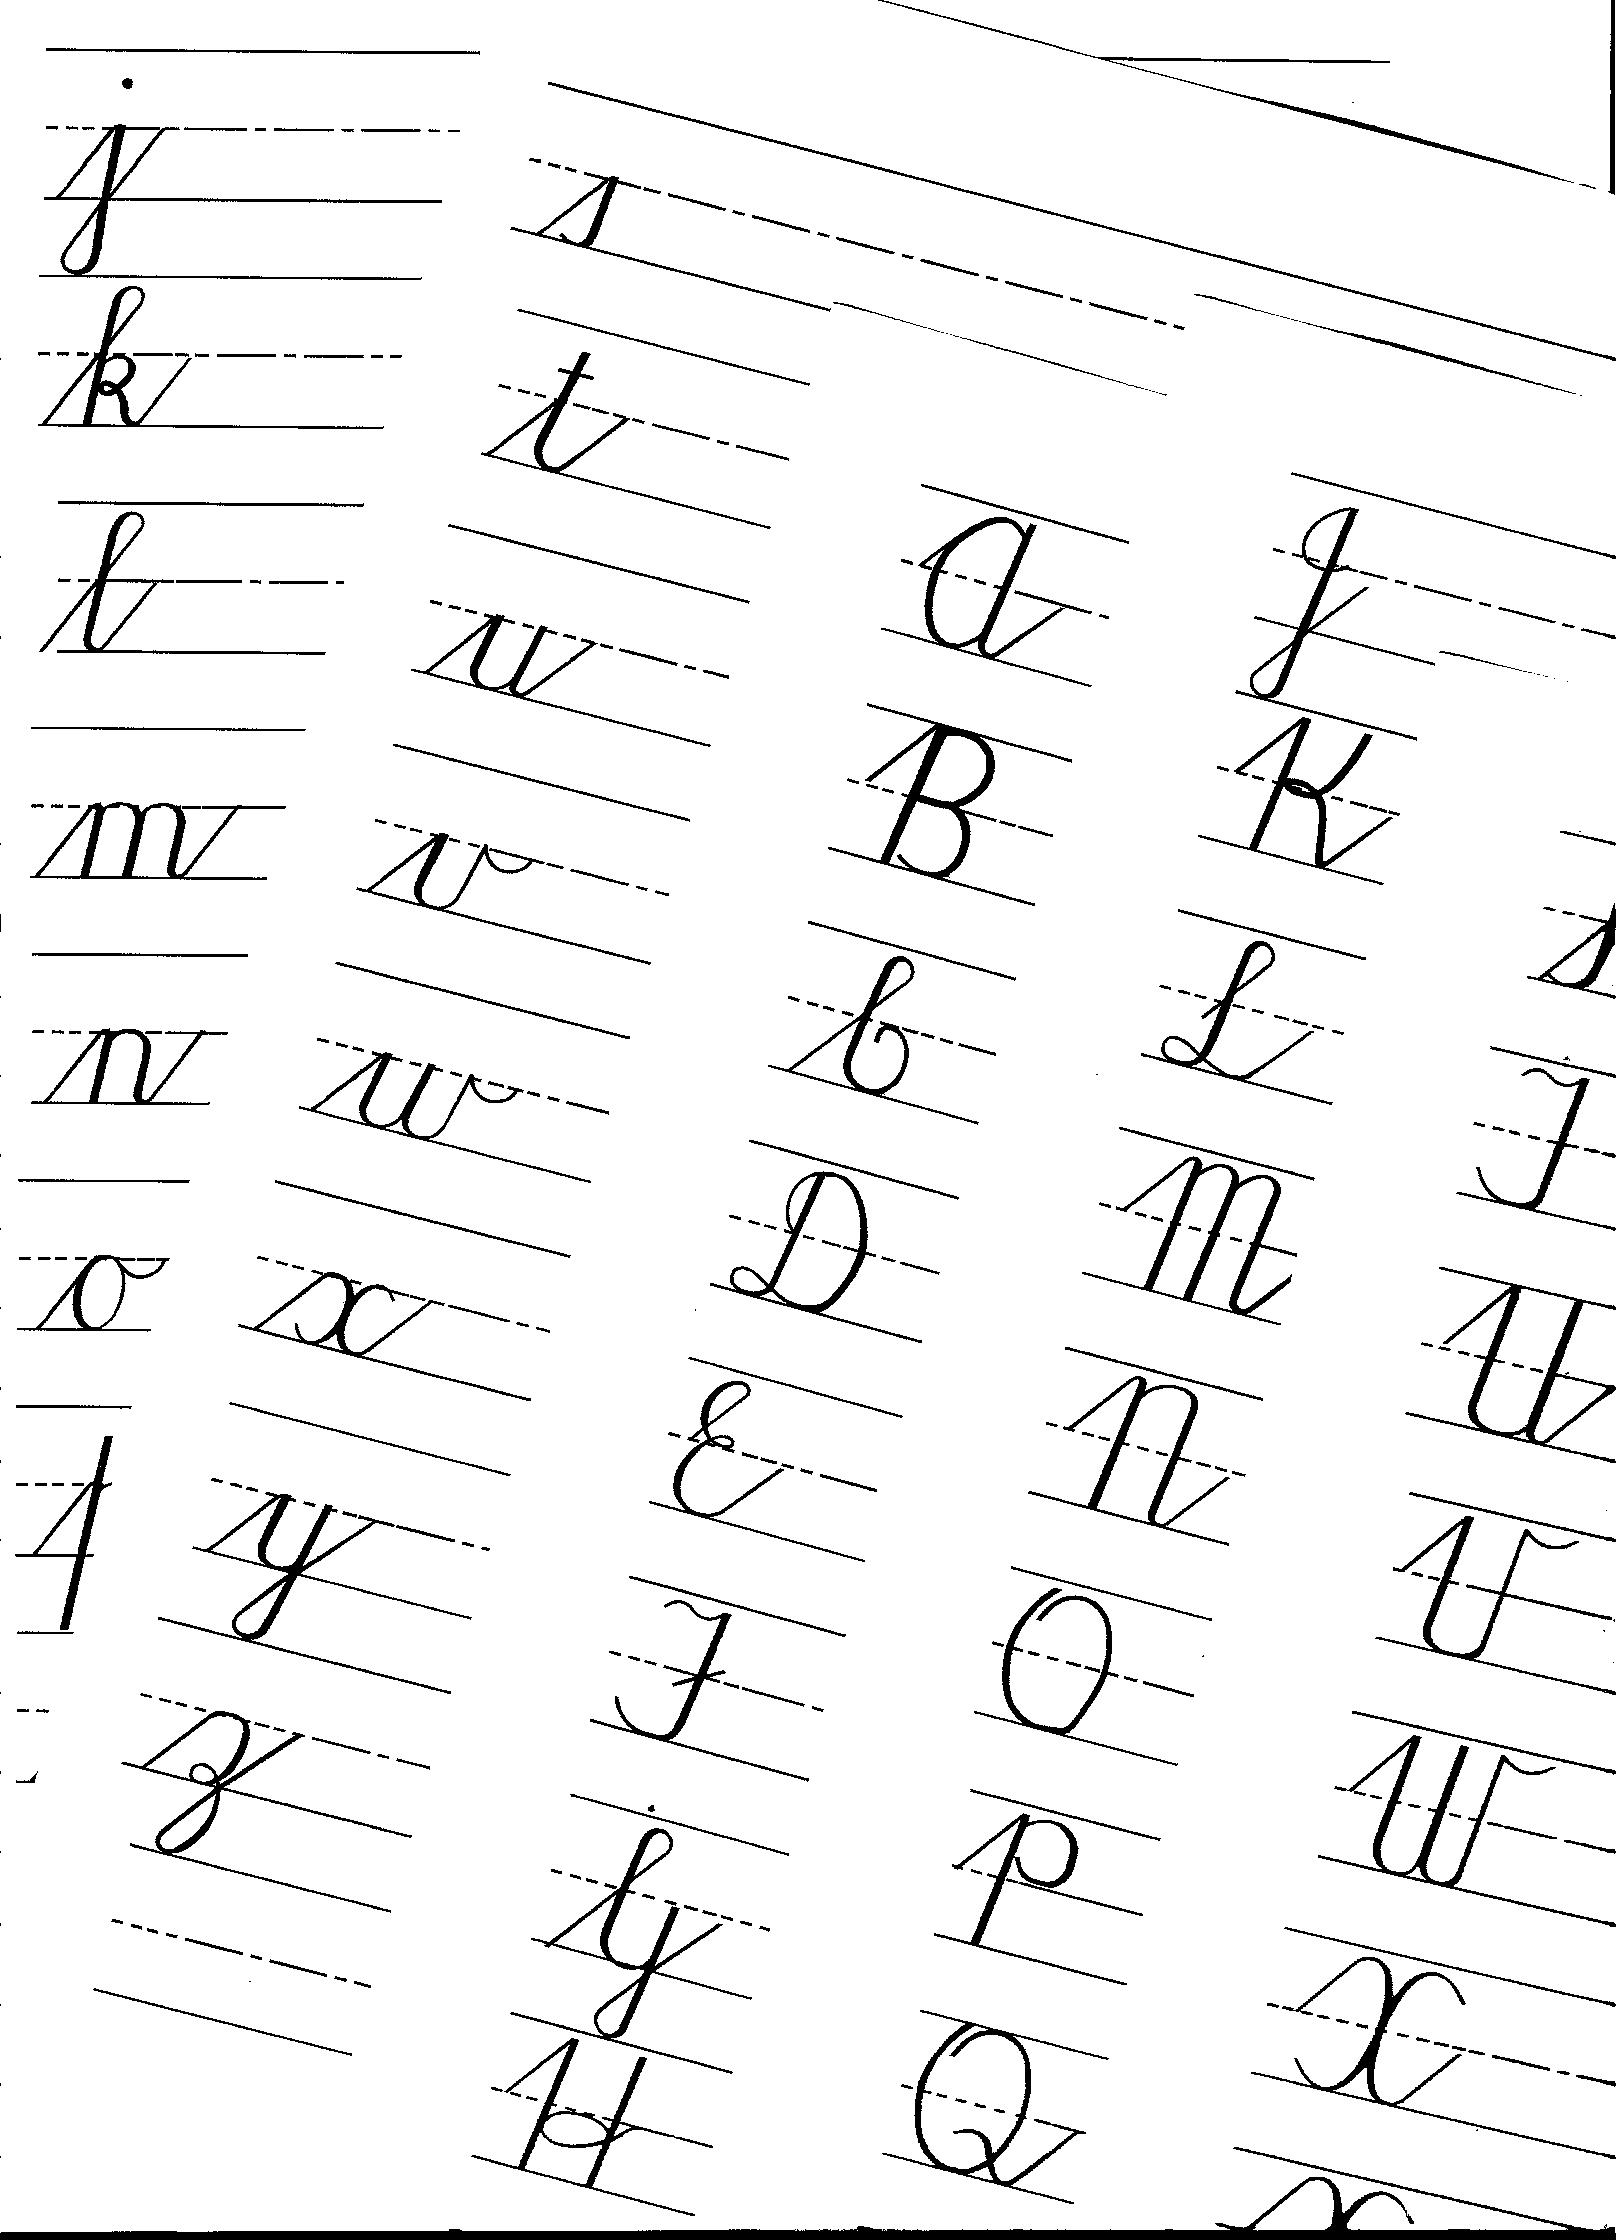 16-best-images-of-lower-case-abc-worksheets-write-cursive-letters-free-printable-abc